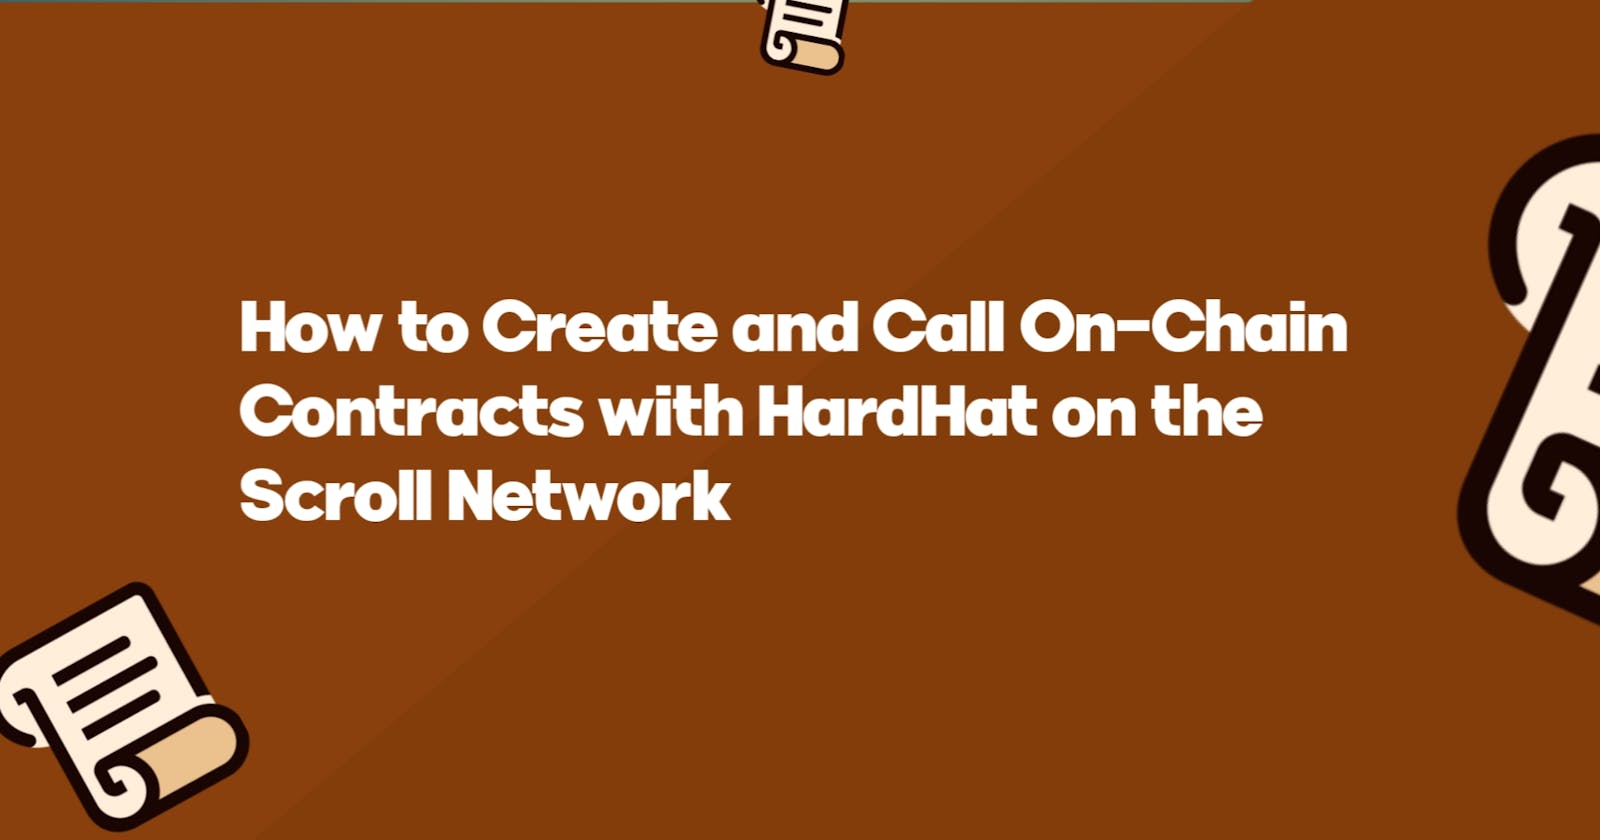 How to Create and Call On-Chain Contracts with HardHat on the Scroll Network